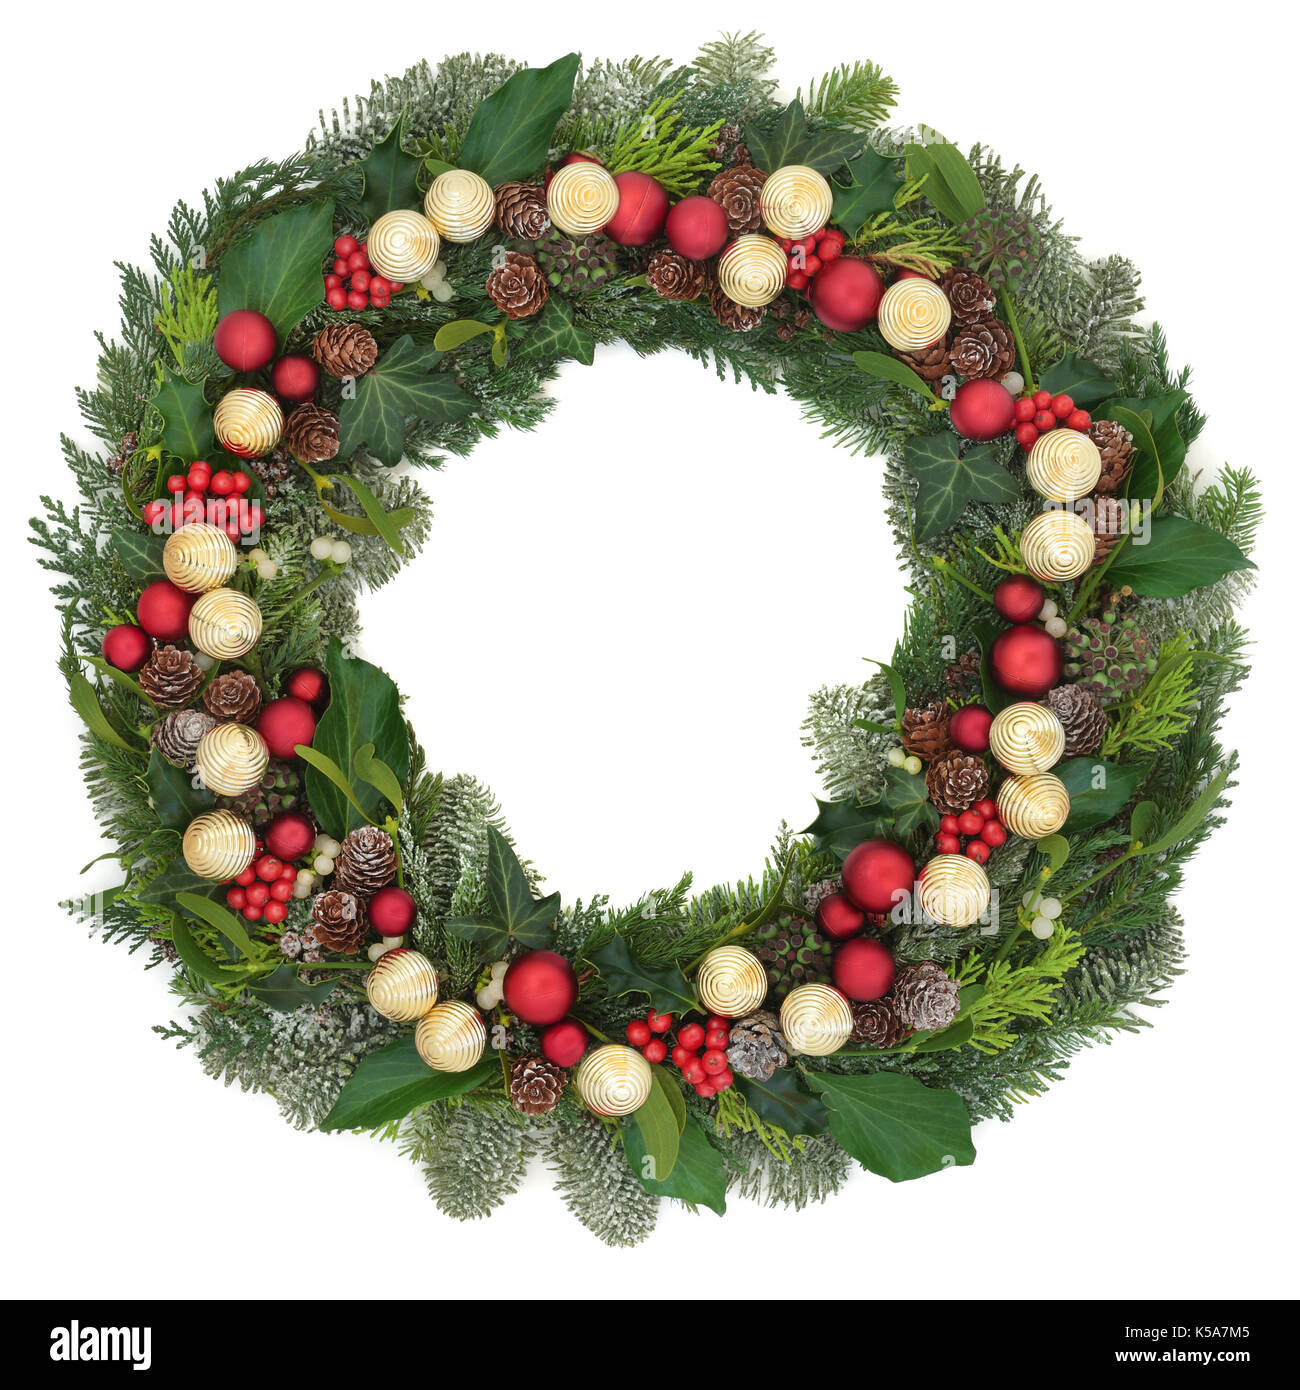 Christmas wreath decoration with red and gold bauble decorations, mistletoe, snow covered natural juniper fir, blue spruce, cedar, pine cones and ivy  Stock Photo